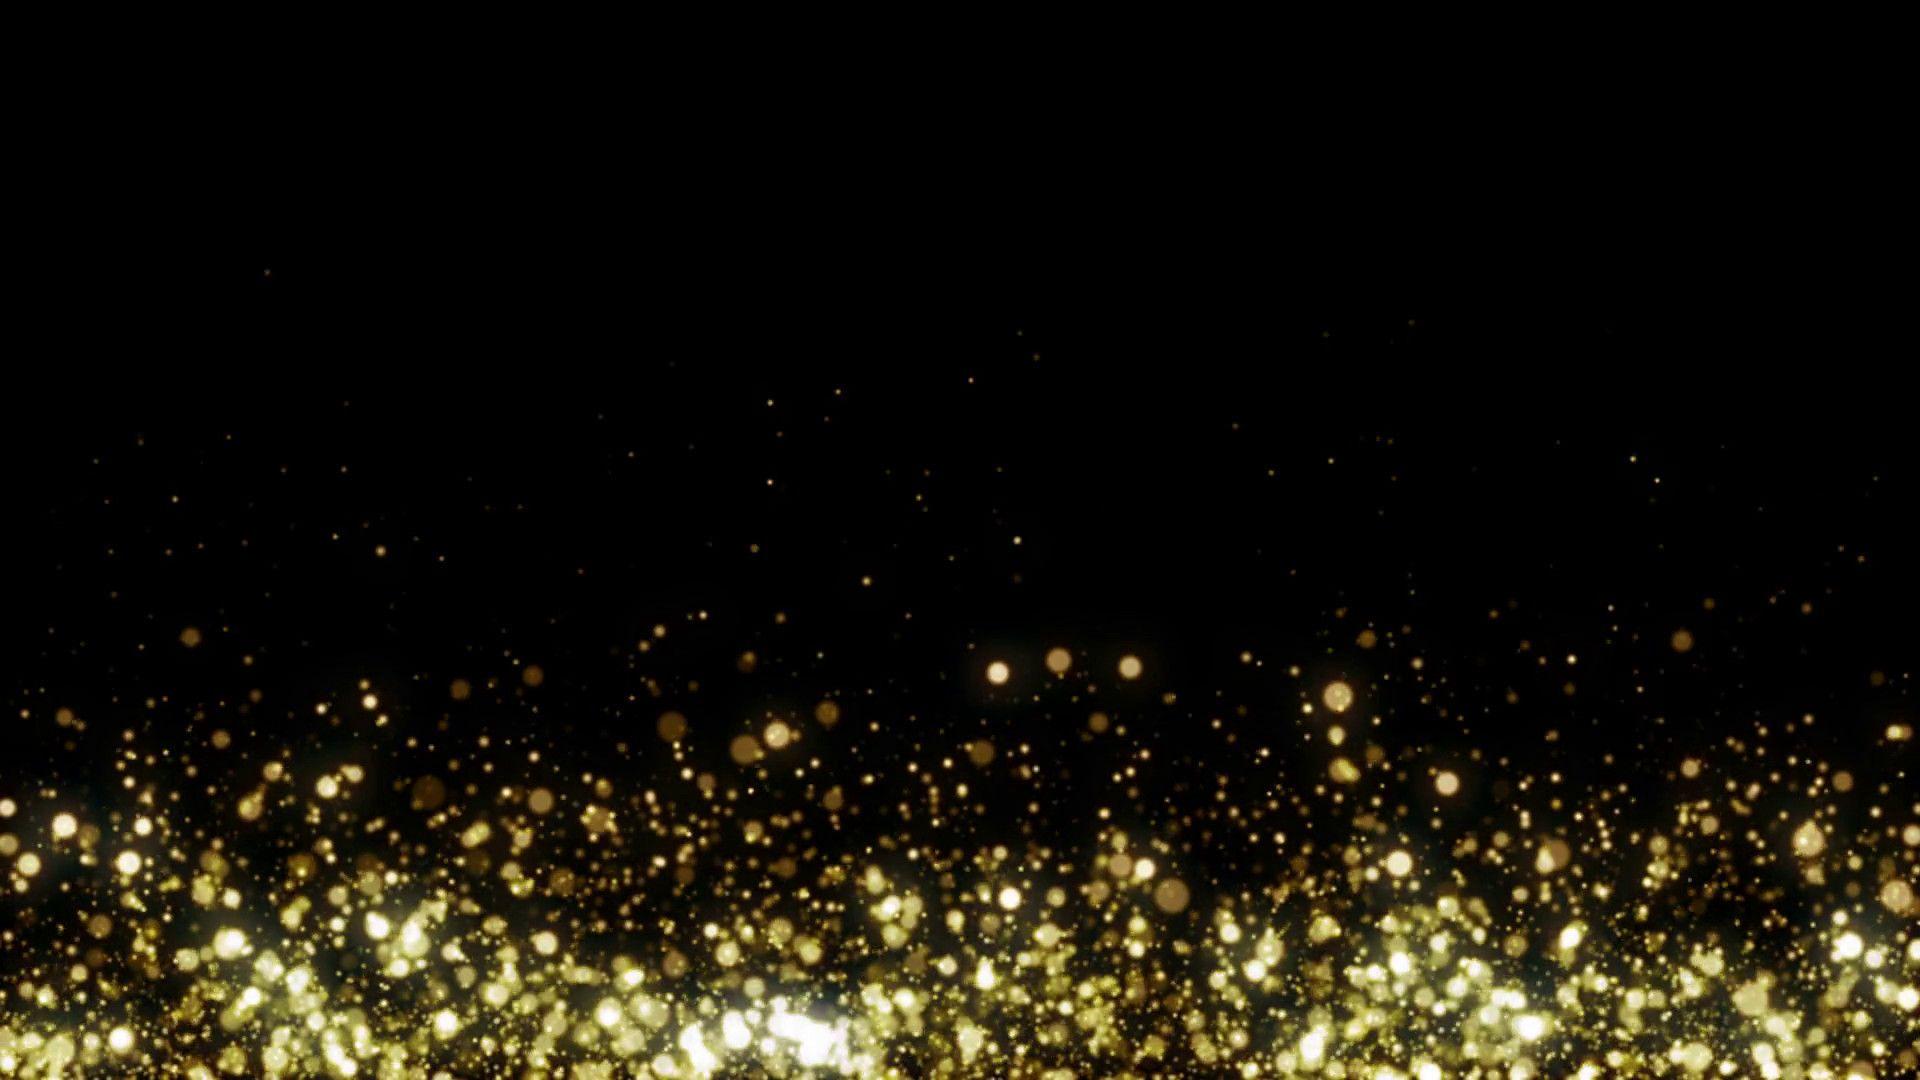 Black and Gold Glitter Wallpapers - Top Free Black and Gold Glitter